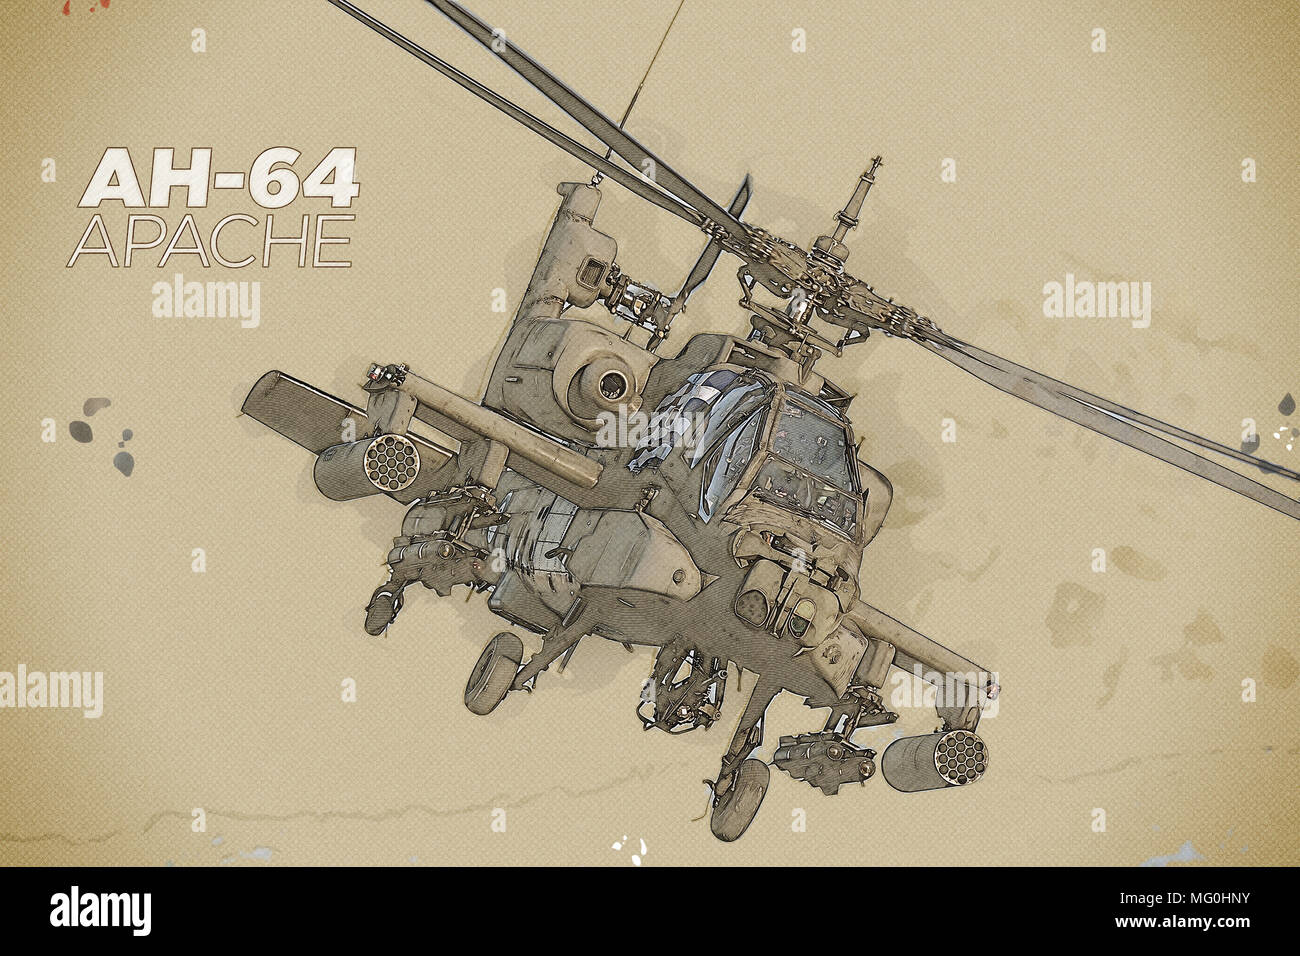 Mixed art style illustration of an AH-64 Apache attack helicopter Stock Photo